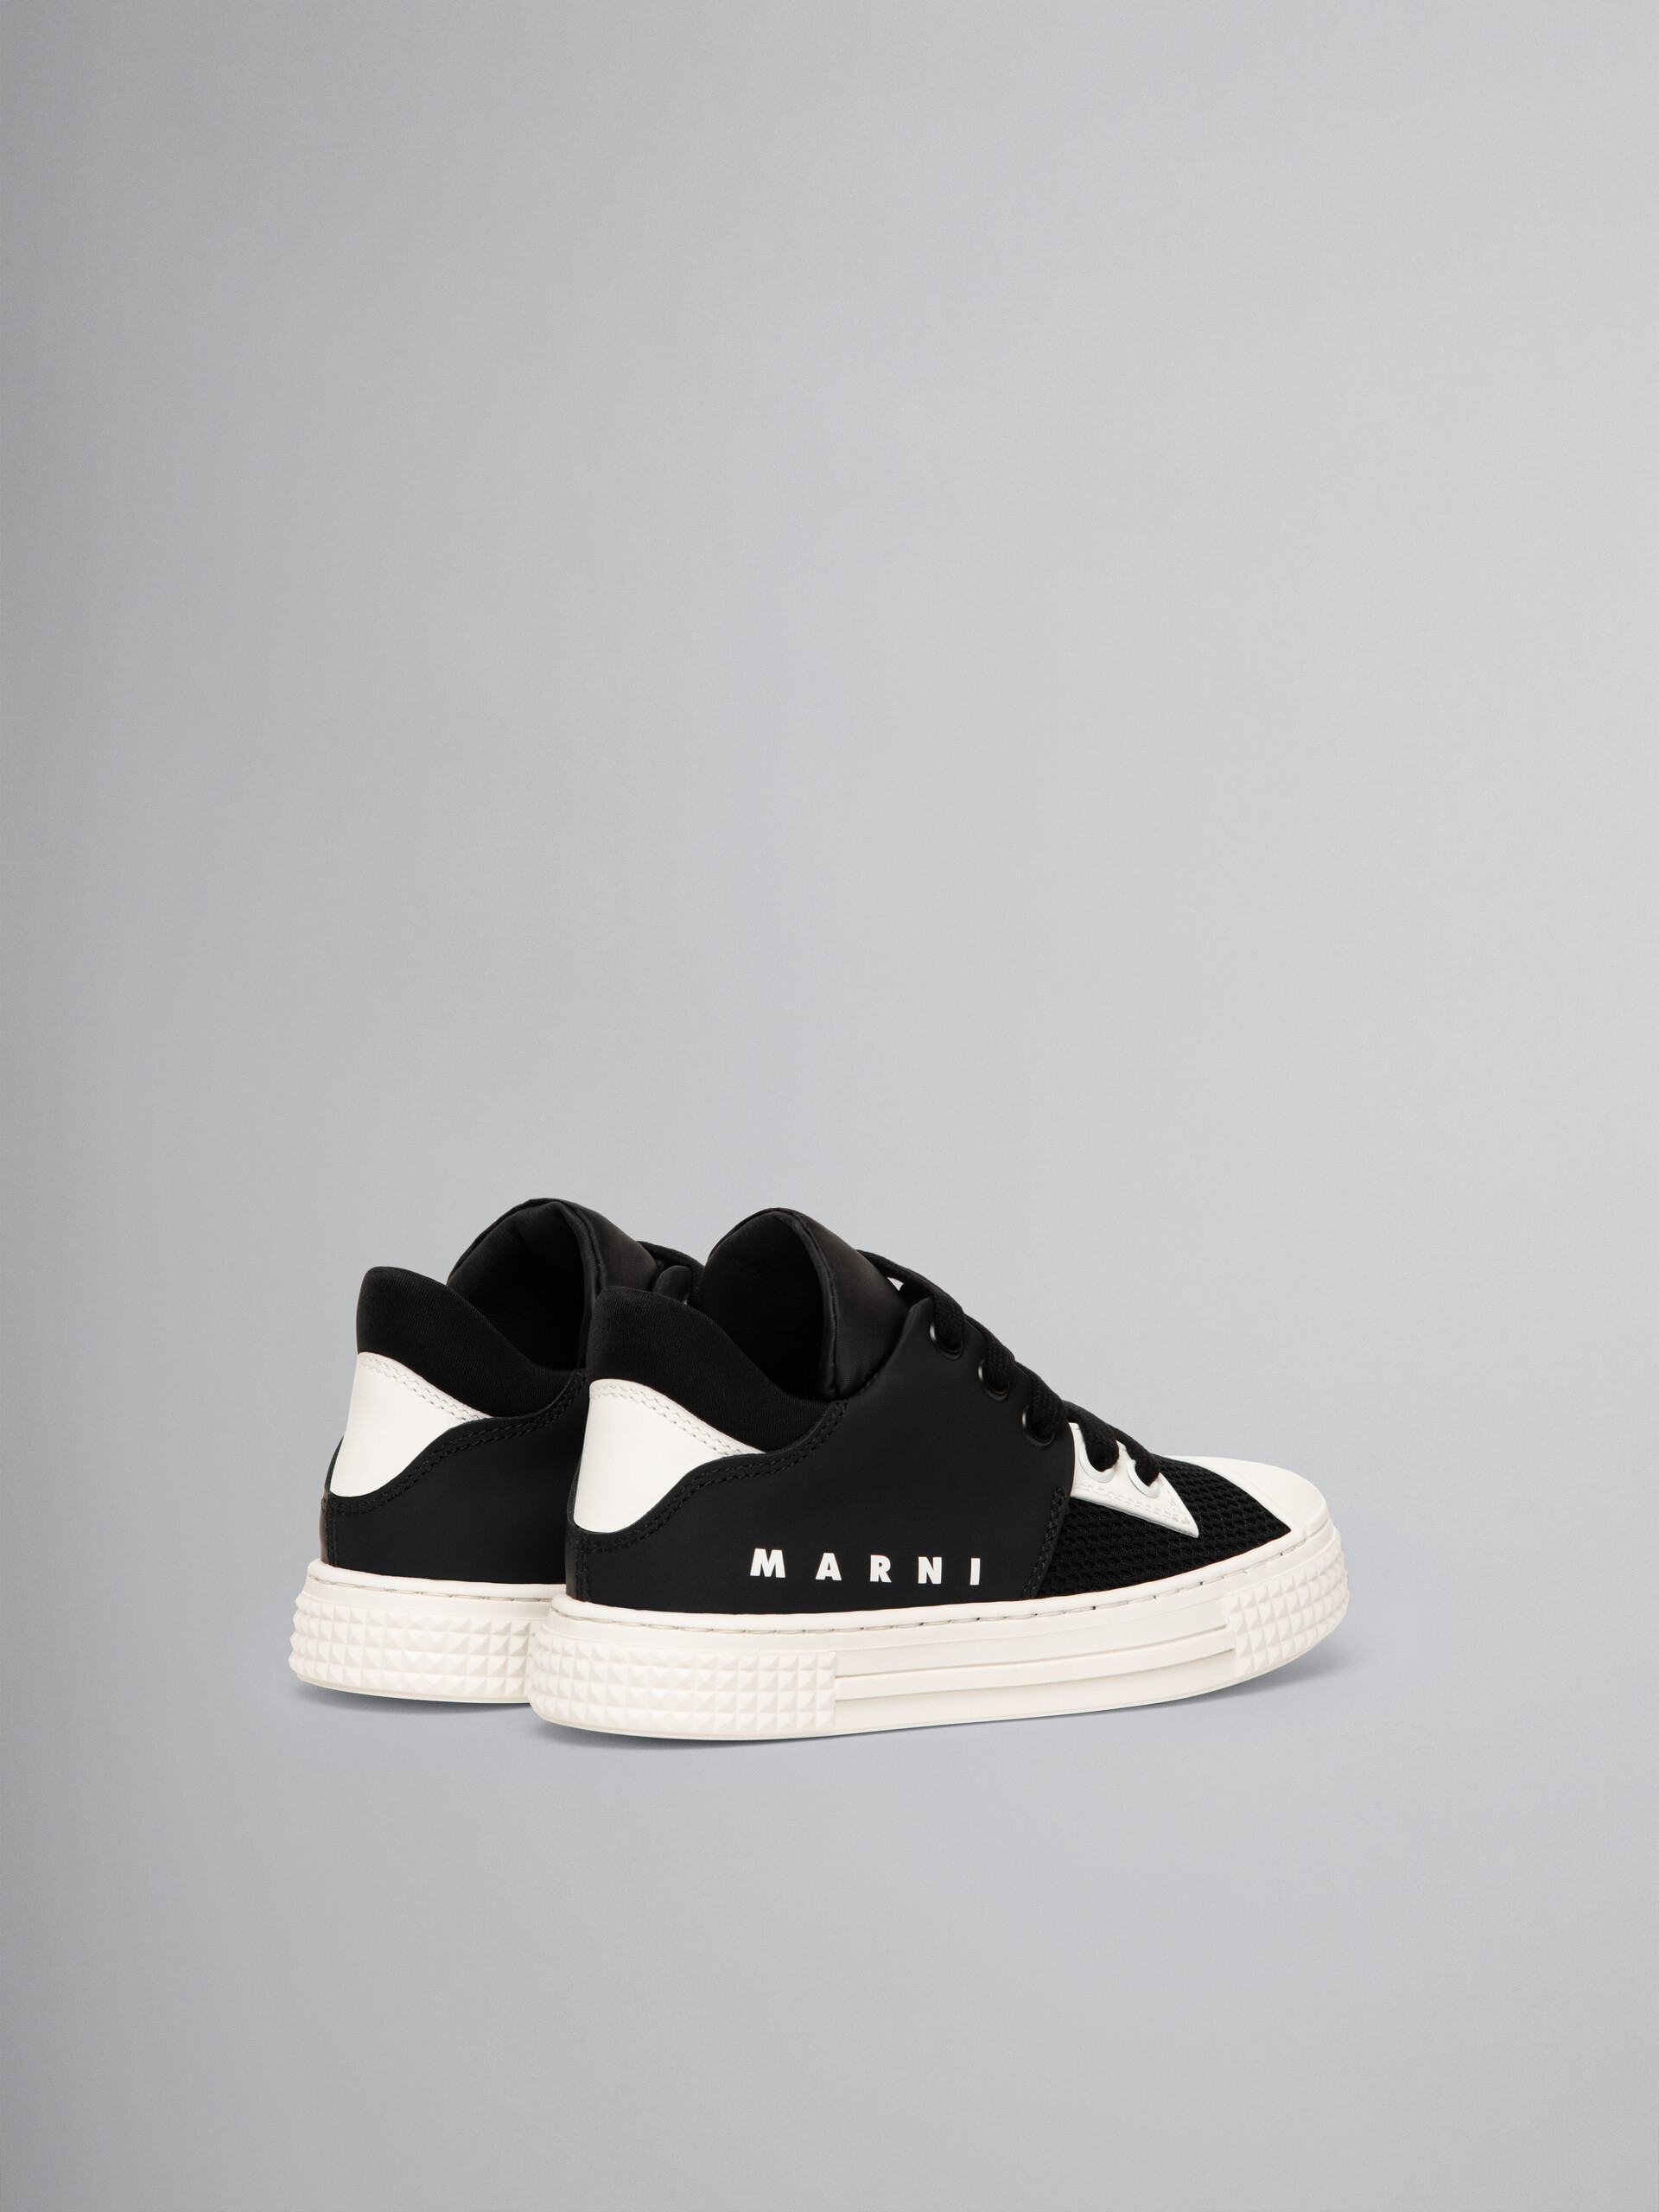 Black leather sneaker with Marni logo - Other accessories - Image 3